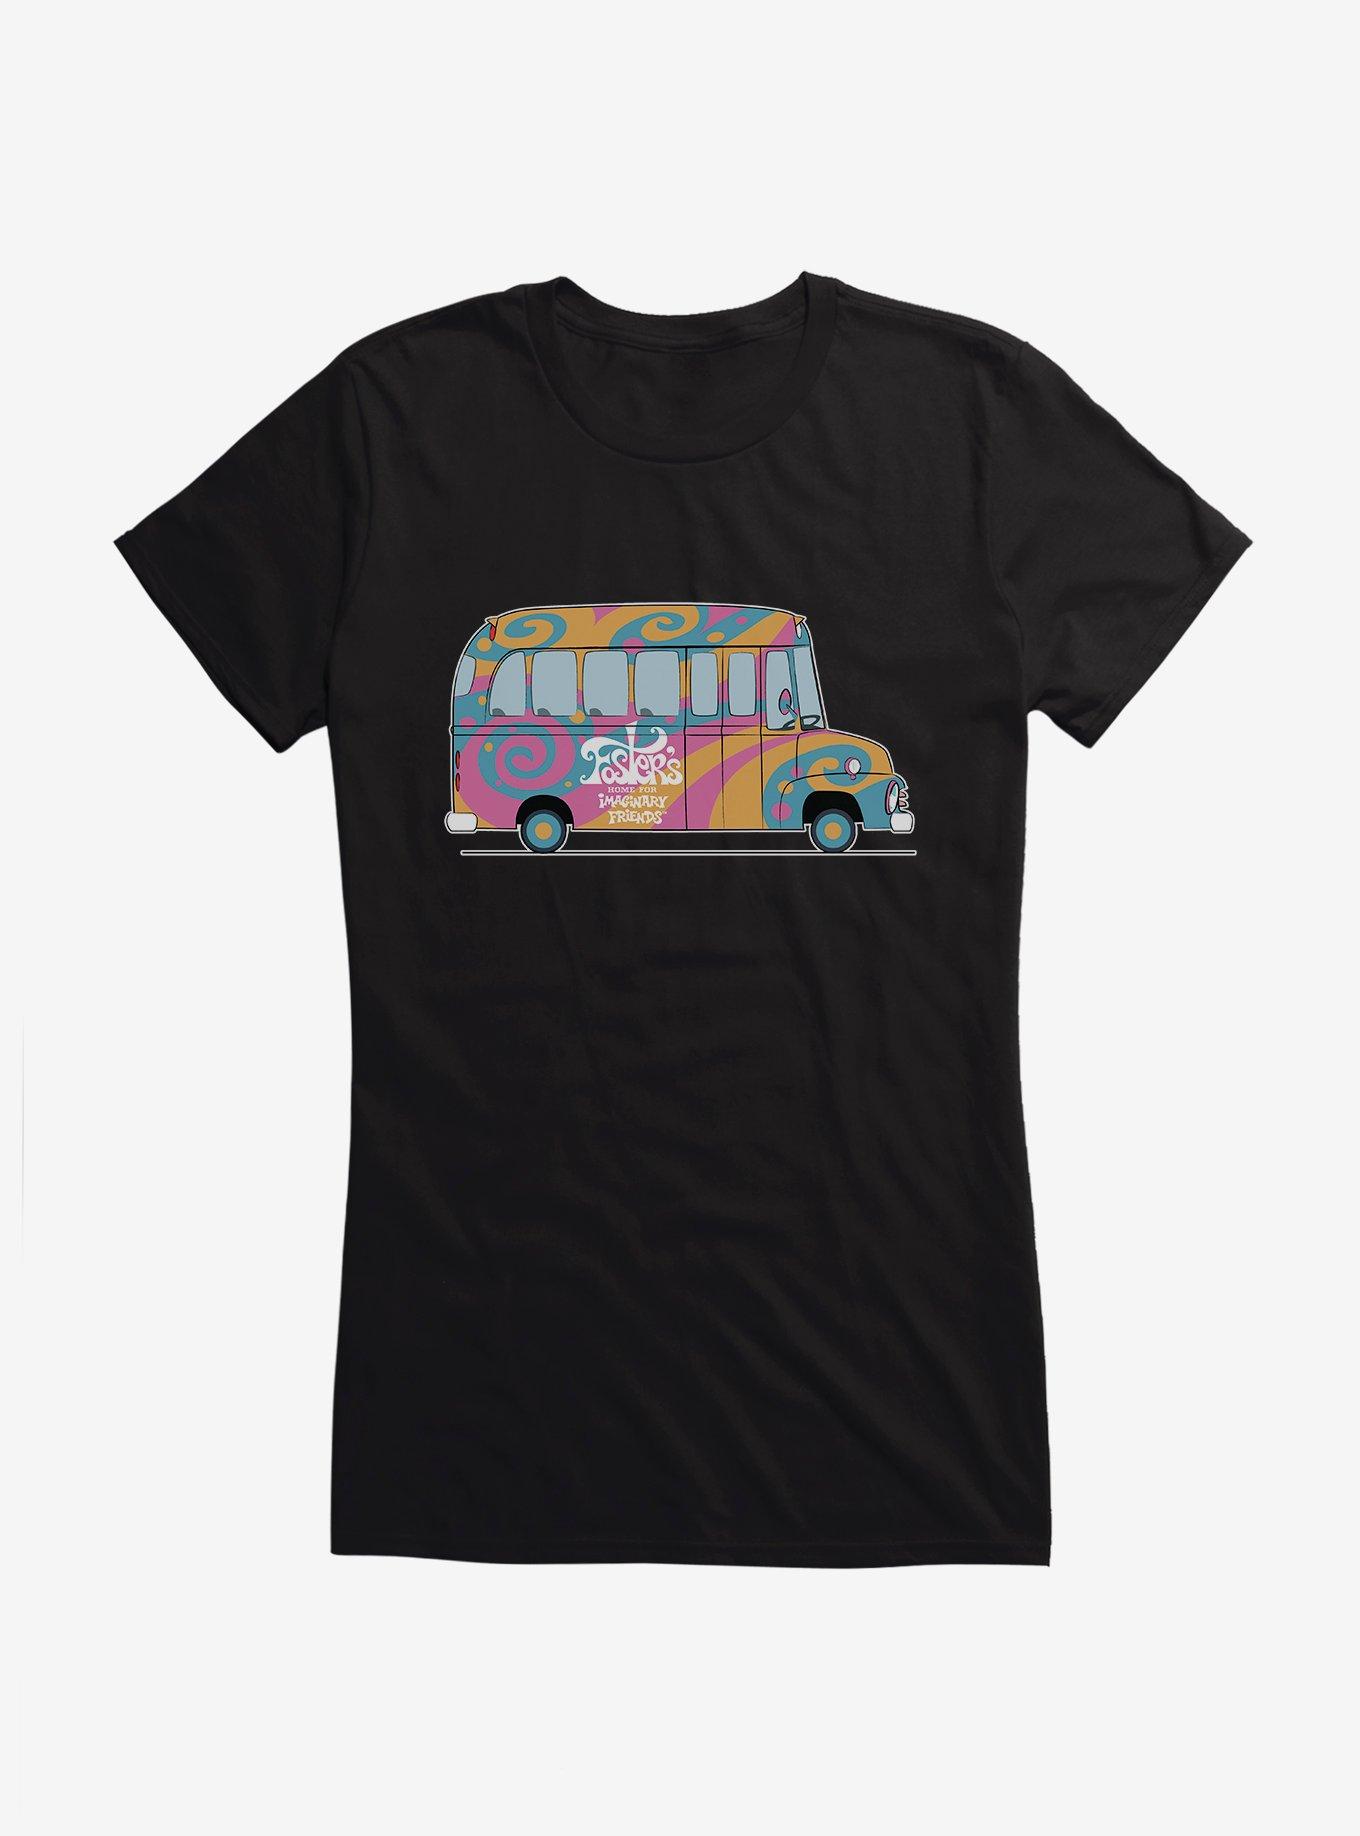 Foster's Home For Imaginary Friends School Bus Girl's T-Shirt